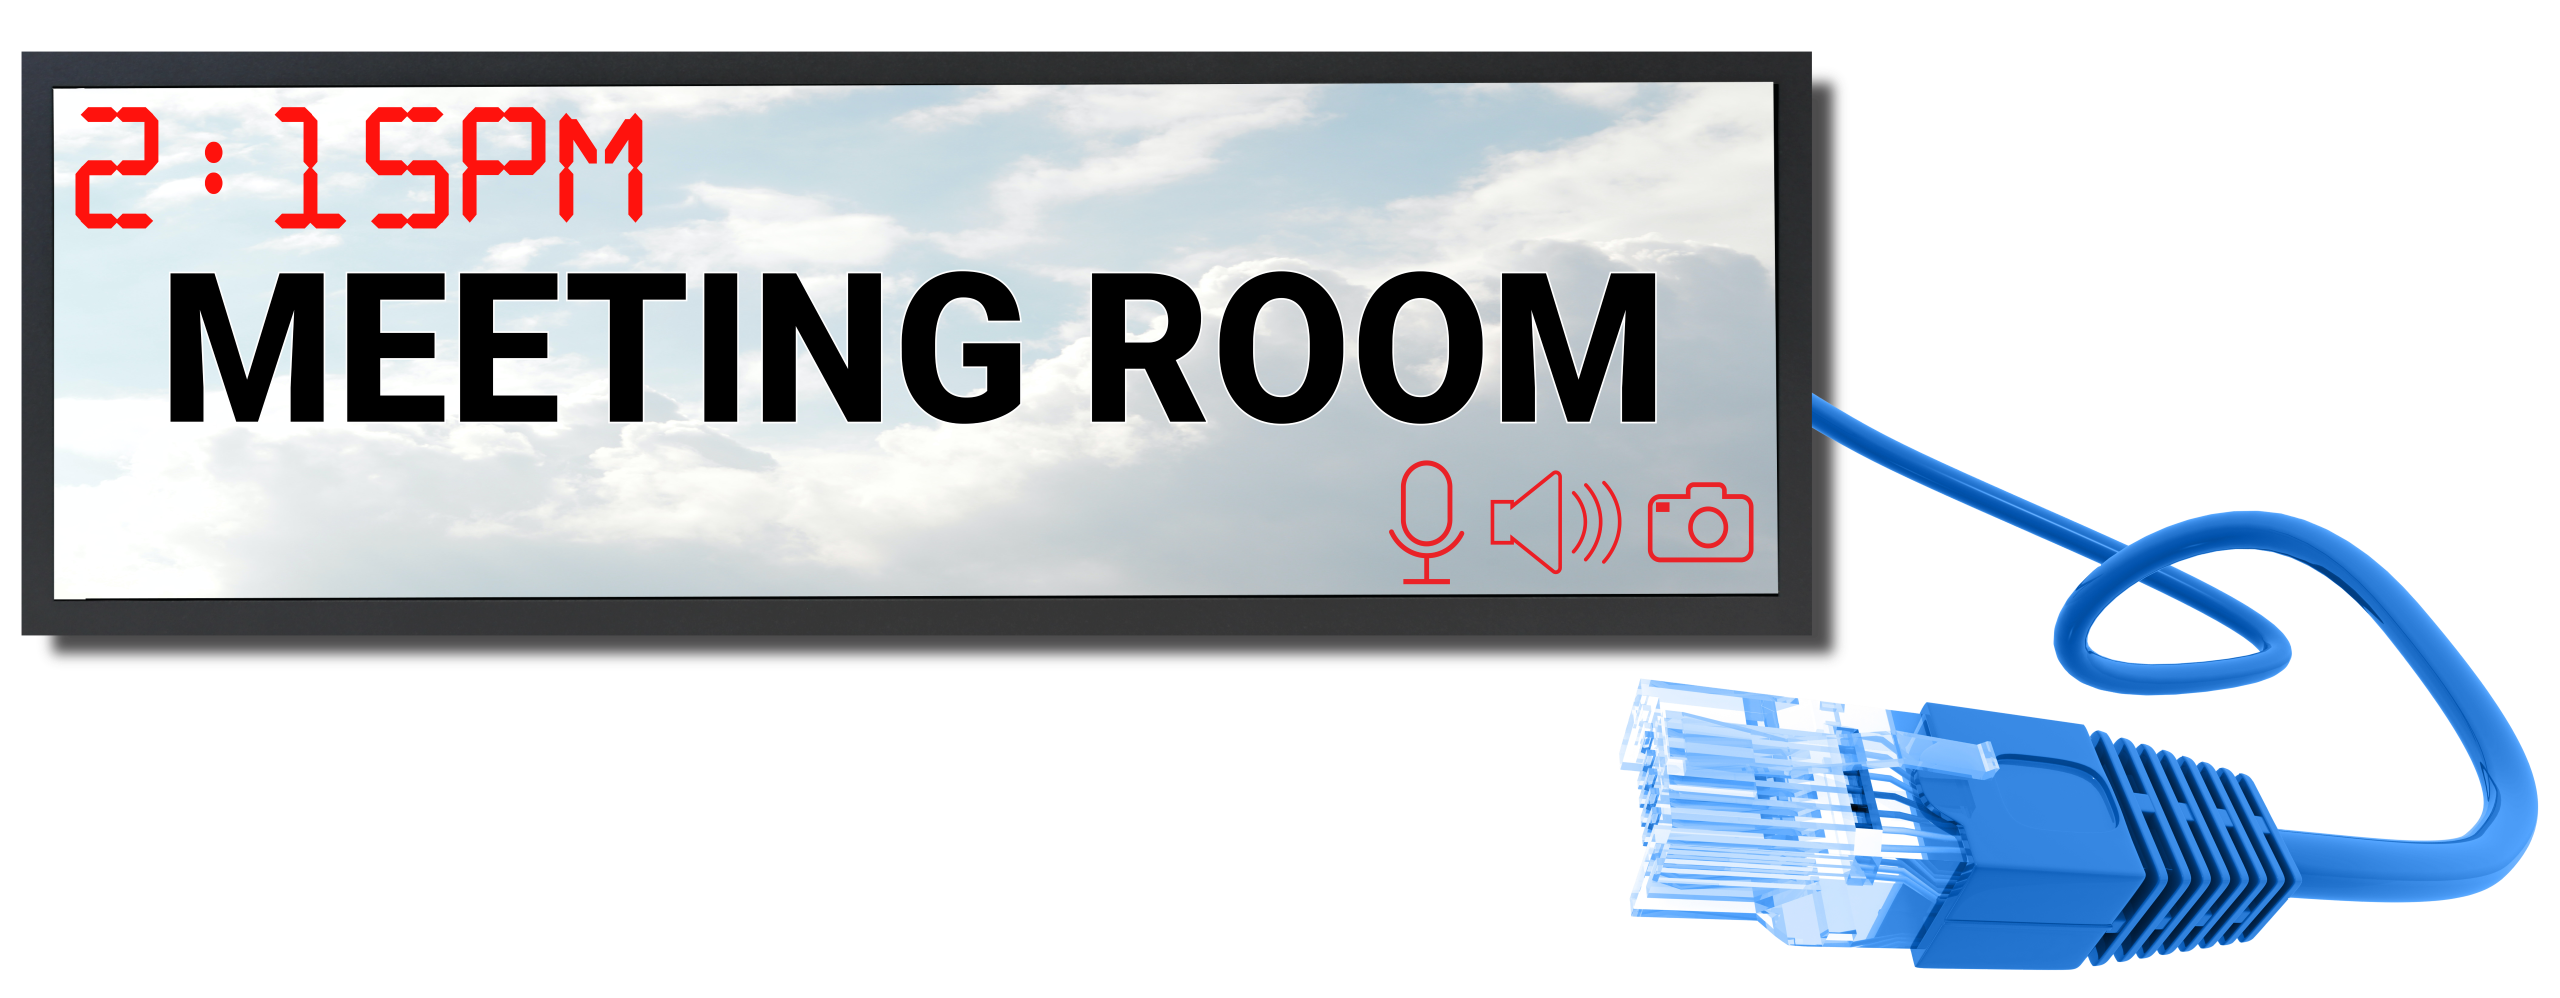 A Panoramic stretch display with the time 2:15pm, "meeting" room and a microphone, speaker and camera icon on the screen. The display has a large blue ethernet cable coming out from the side.